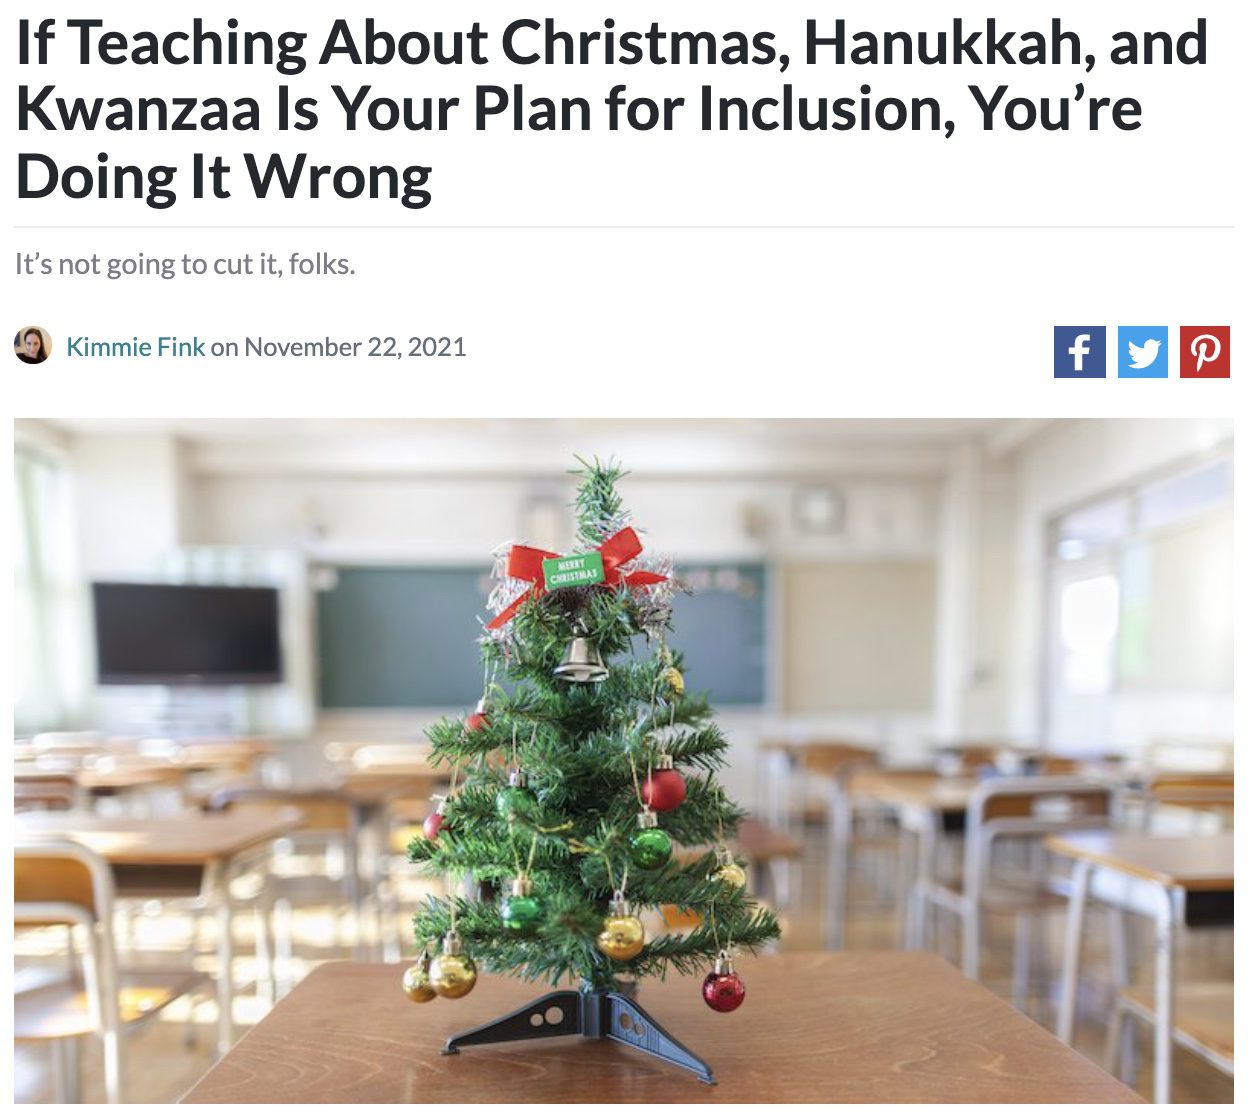 Screencap of an article about teaching holiday inclusion